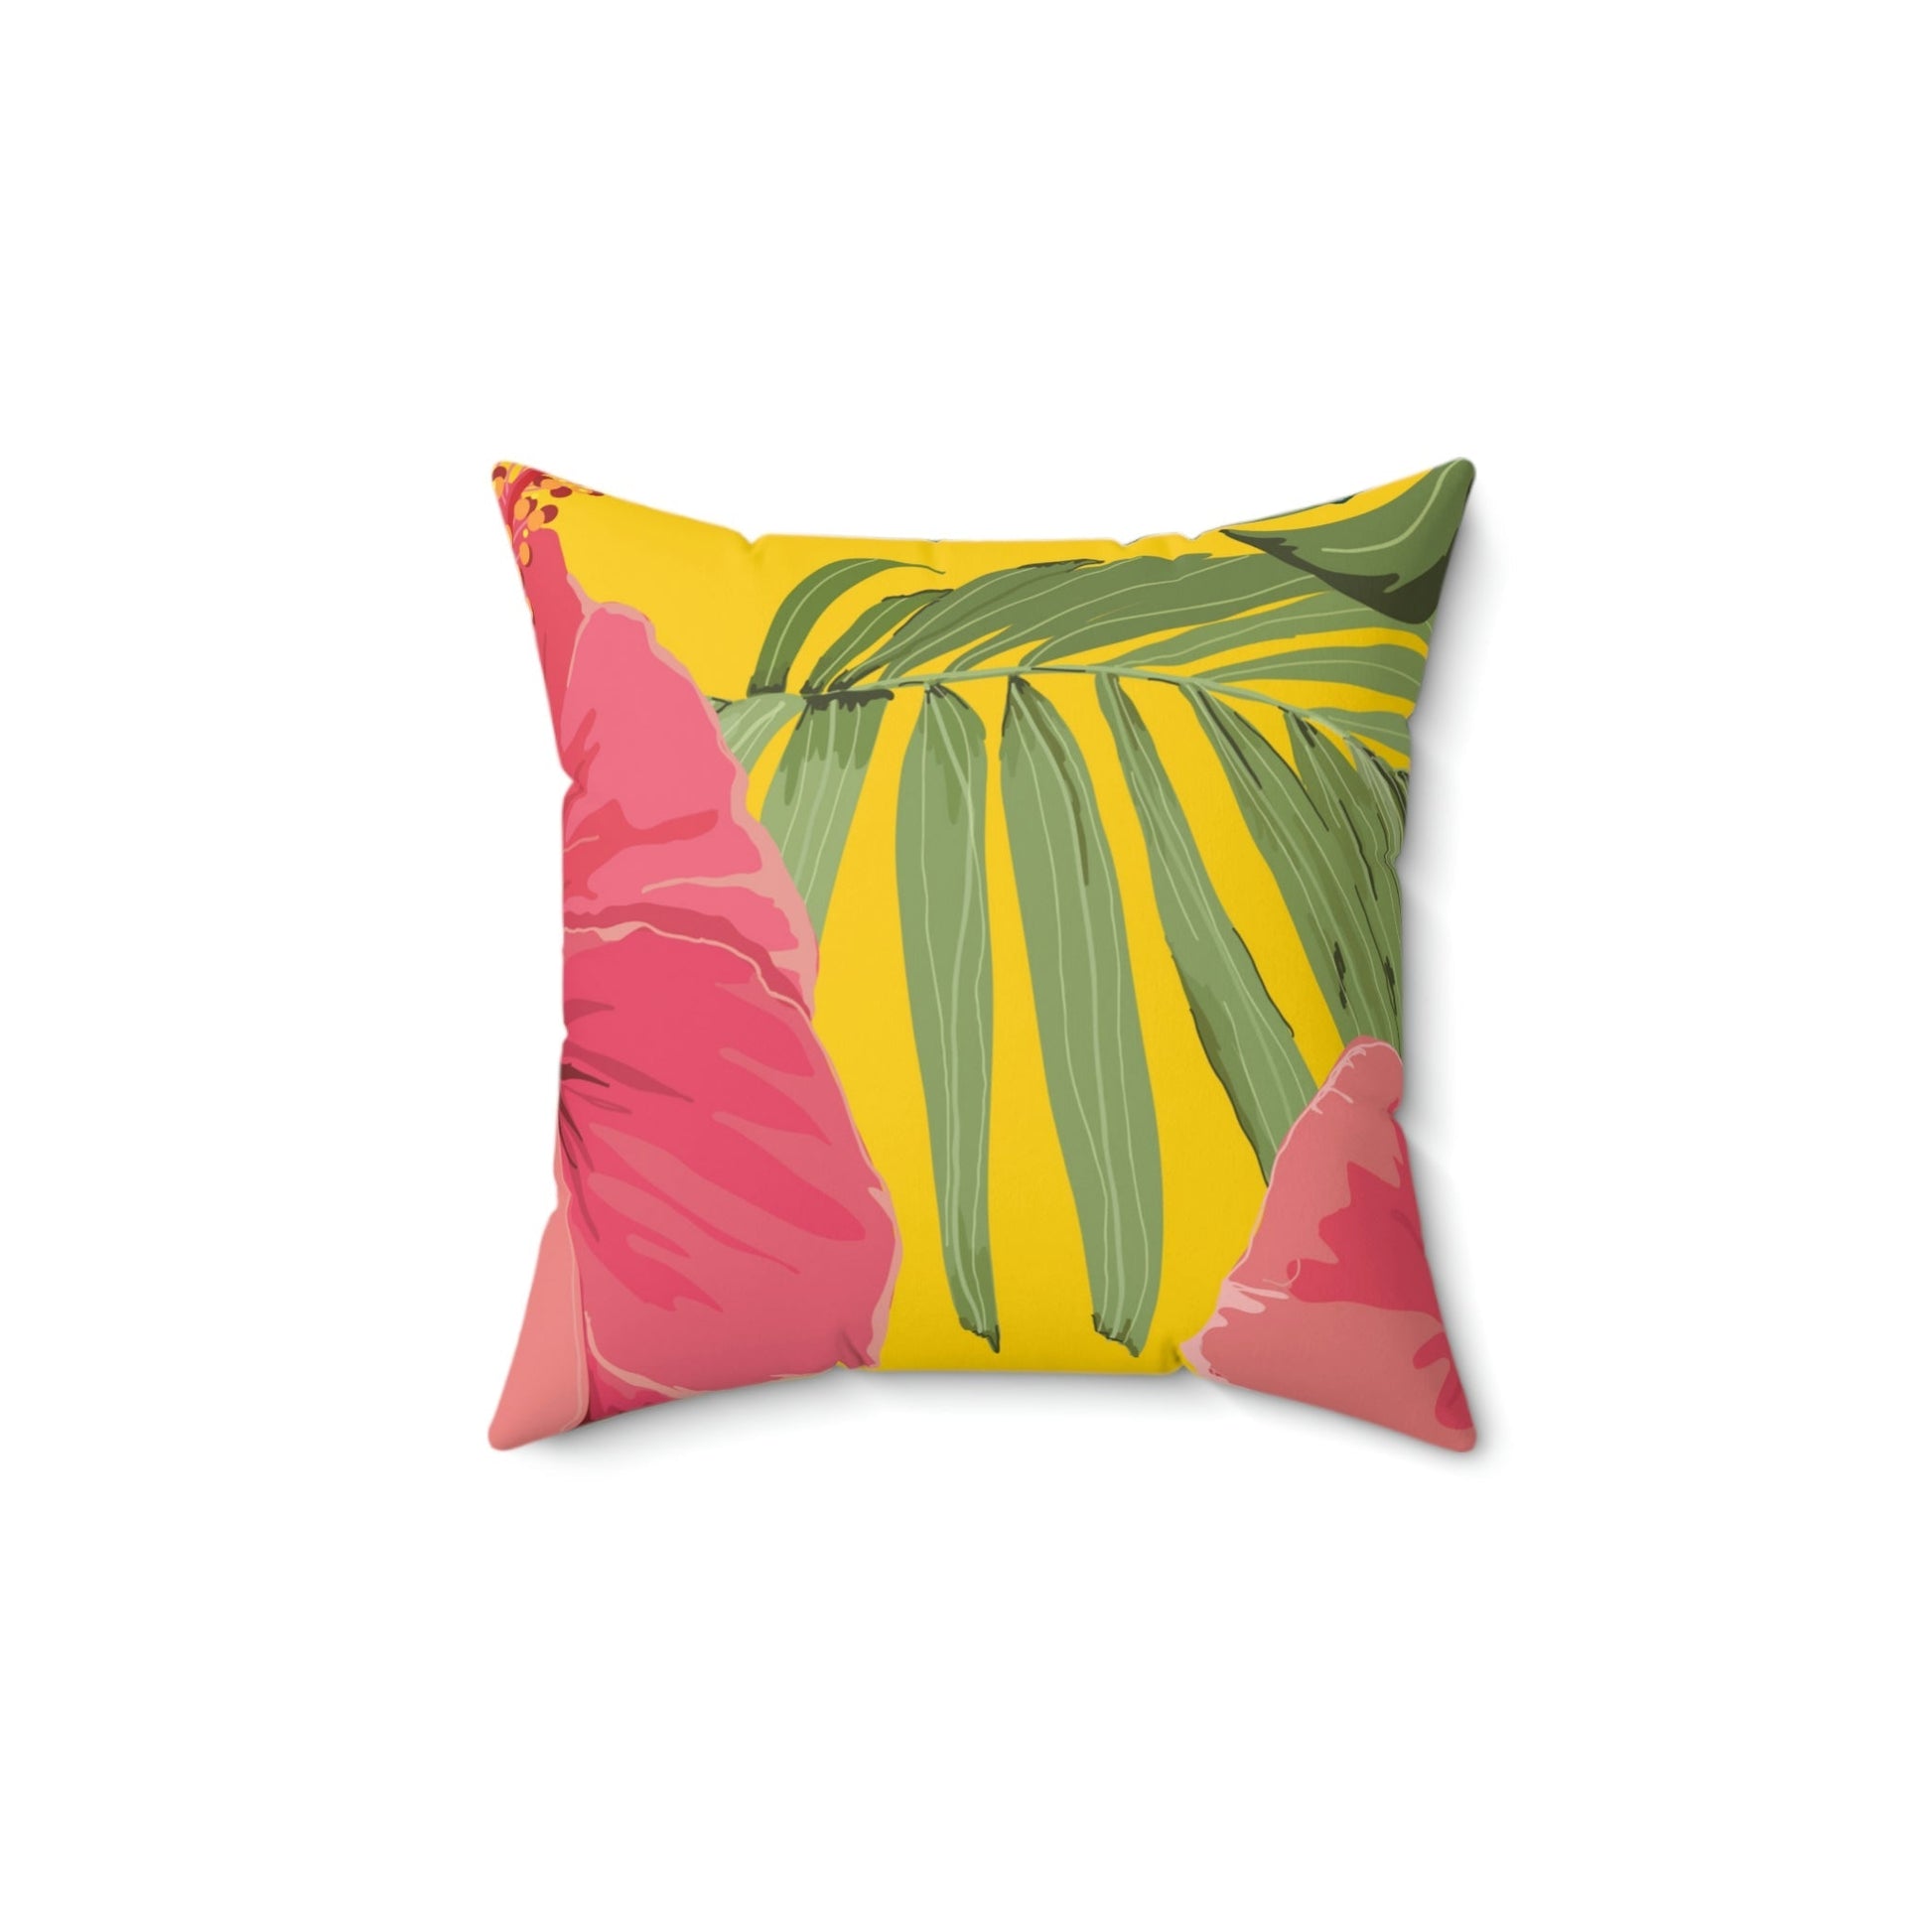 Hibiscus Flower Square Pillow Home Decor Pink Sweetheart